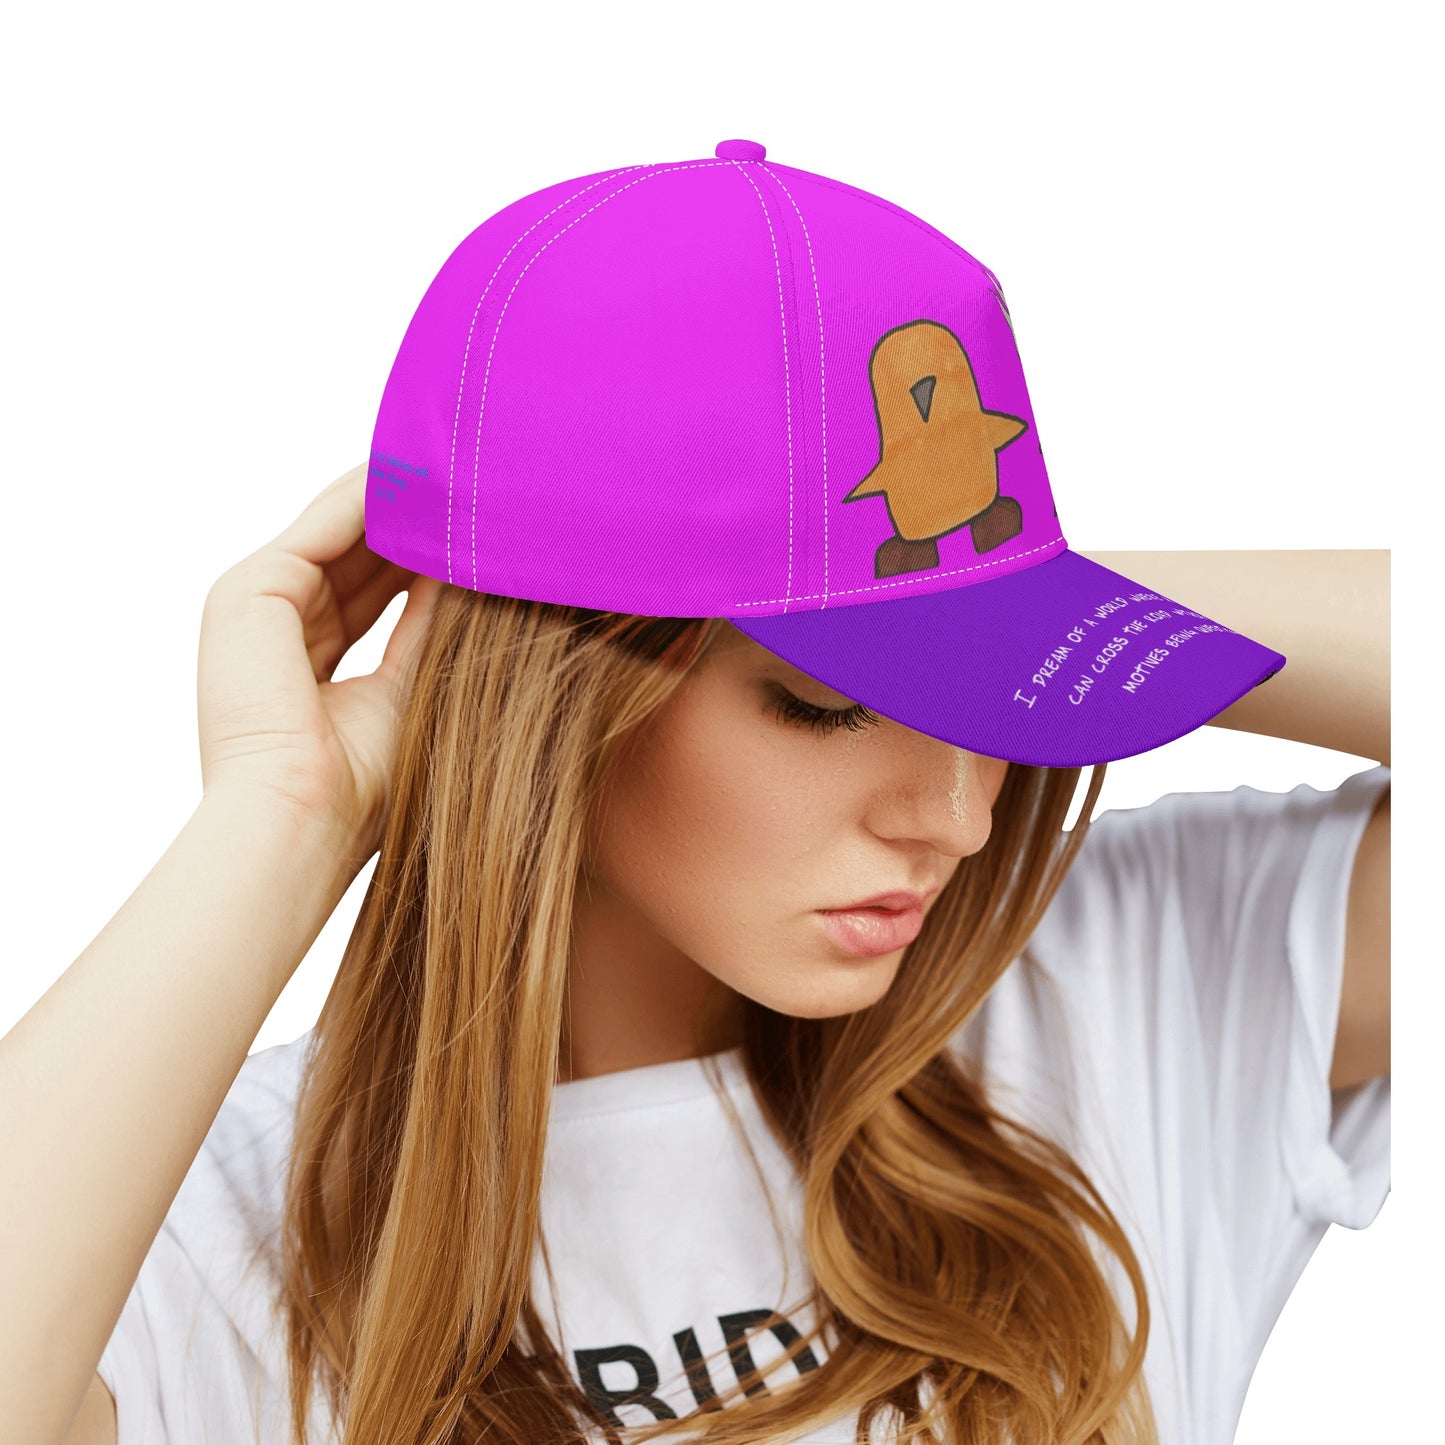 'I dream of a world' Baseball Cap with Fuzzy and Muffin artwork by DB  Pink/Purple